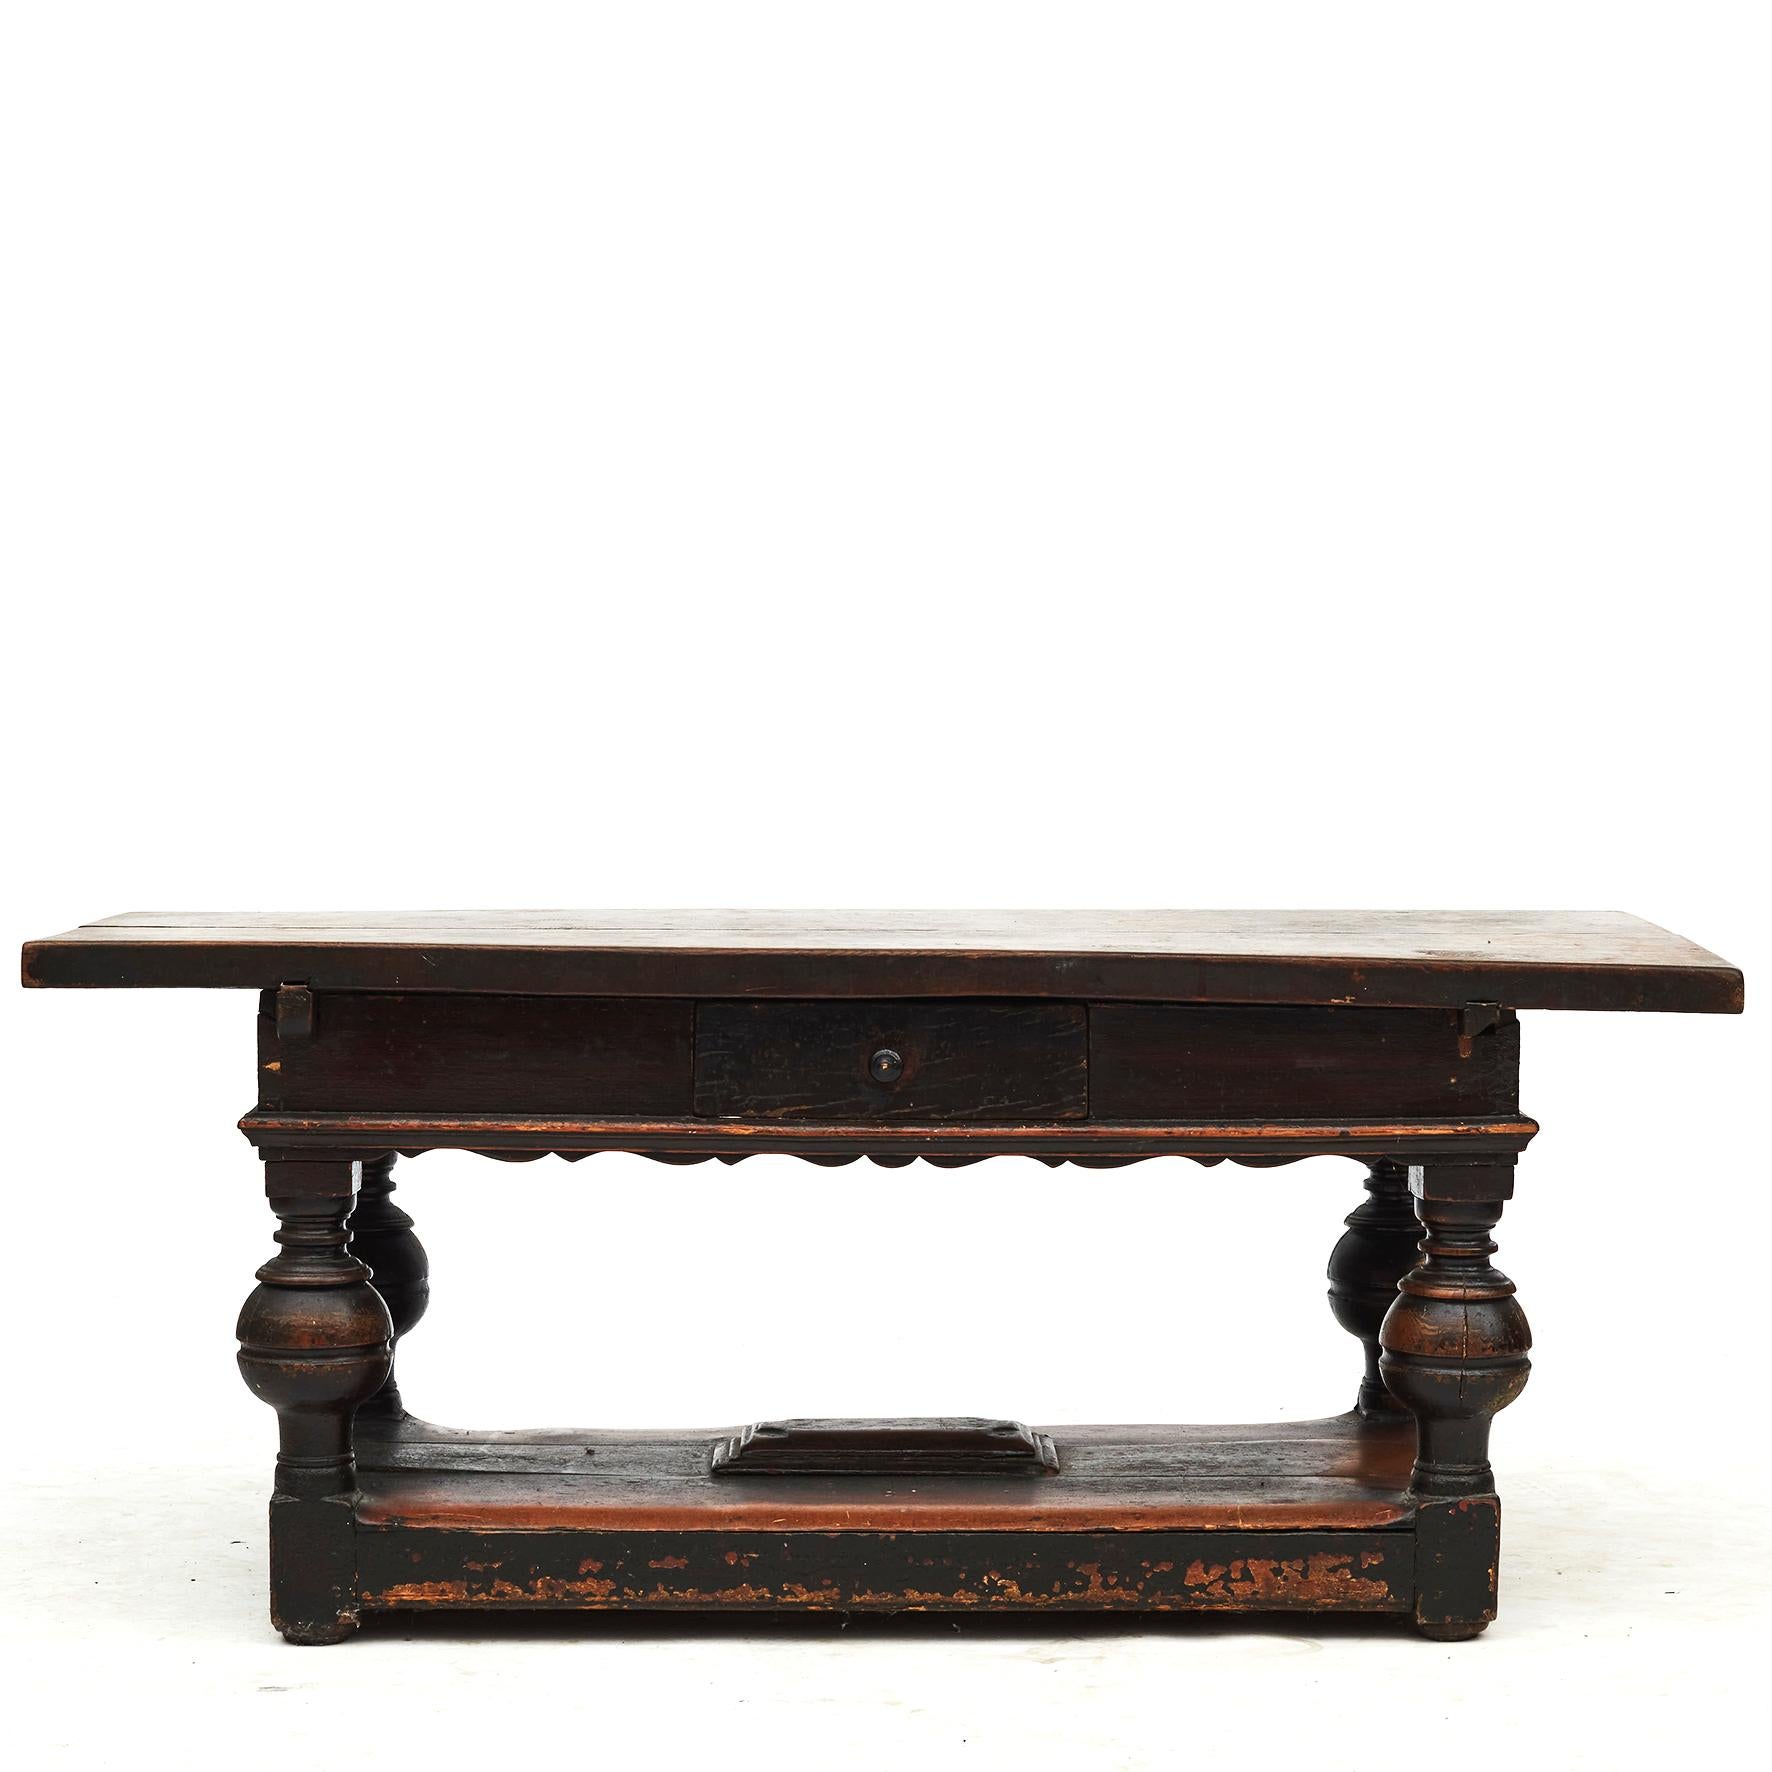 Baroque table with a thick tabletop in oak (6 cm) in two pieces of wood.
Base made of pine with brown color.
Appears untouched with natural beautiful age-related patina.
Denmark, 1720-1750